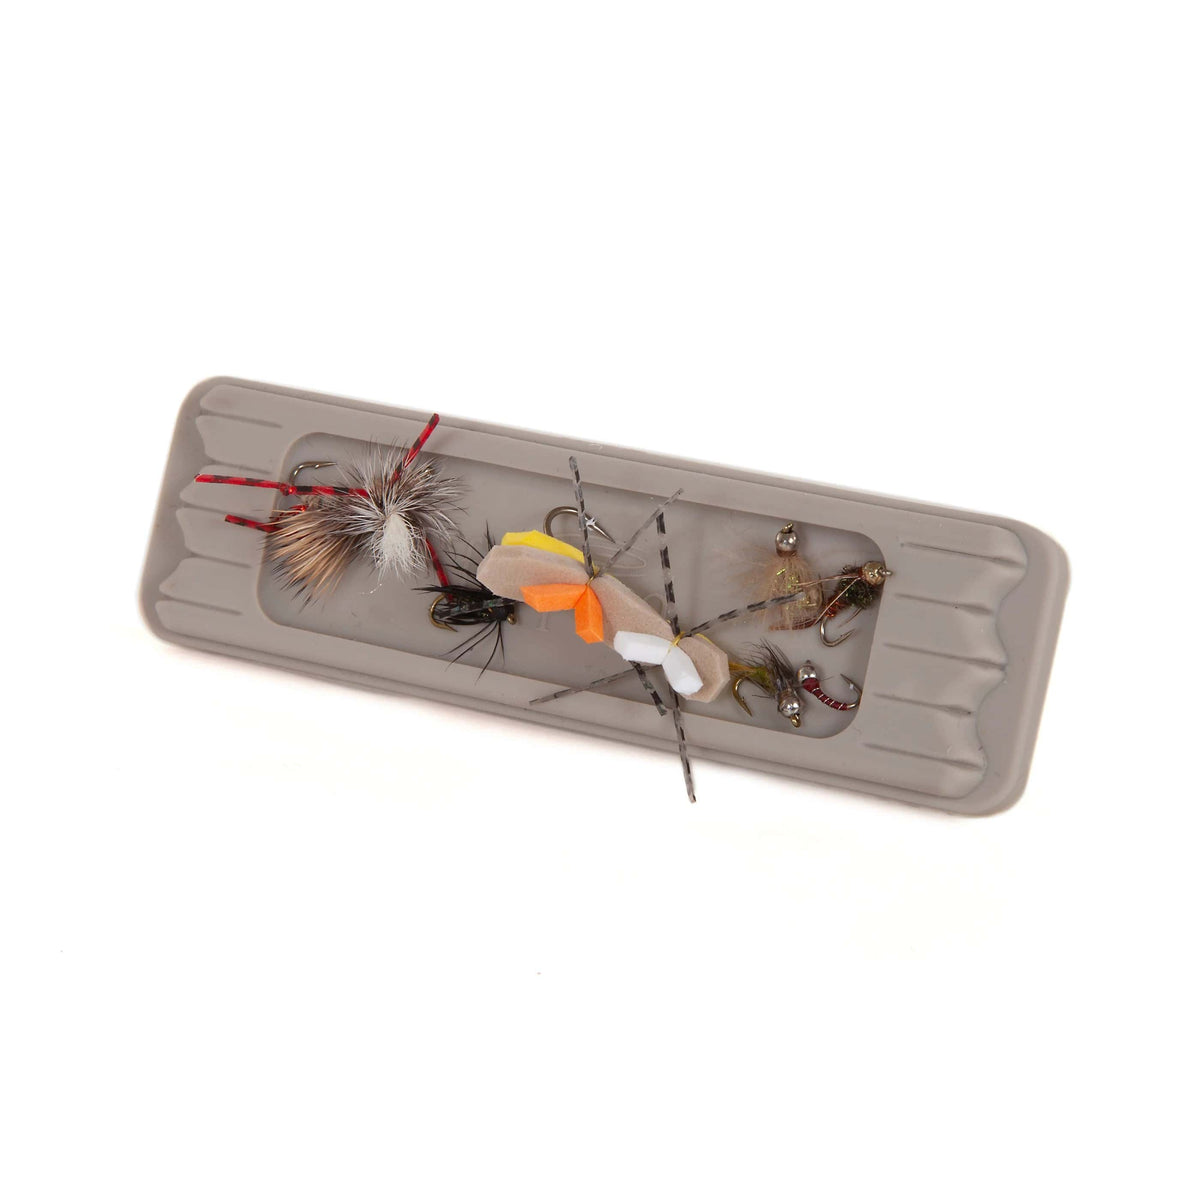 816332016608 Fishpond Tacky Fly Dock MagPad Magnetic Fly Fishing Patch Fly Holder With Flies